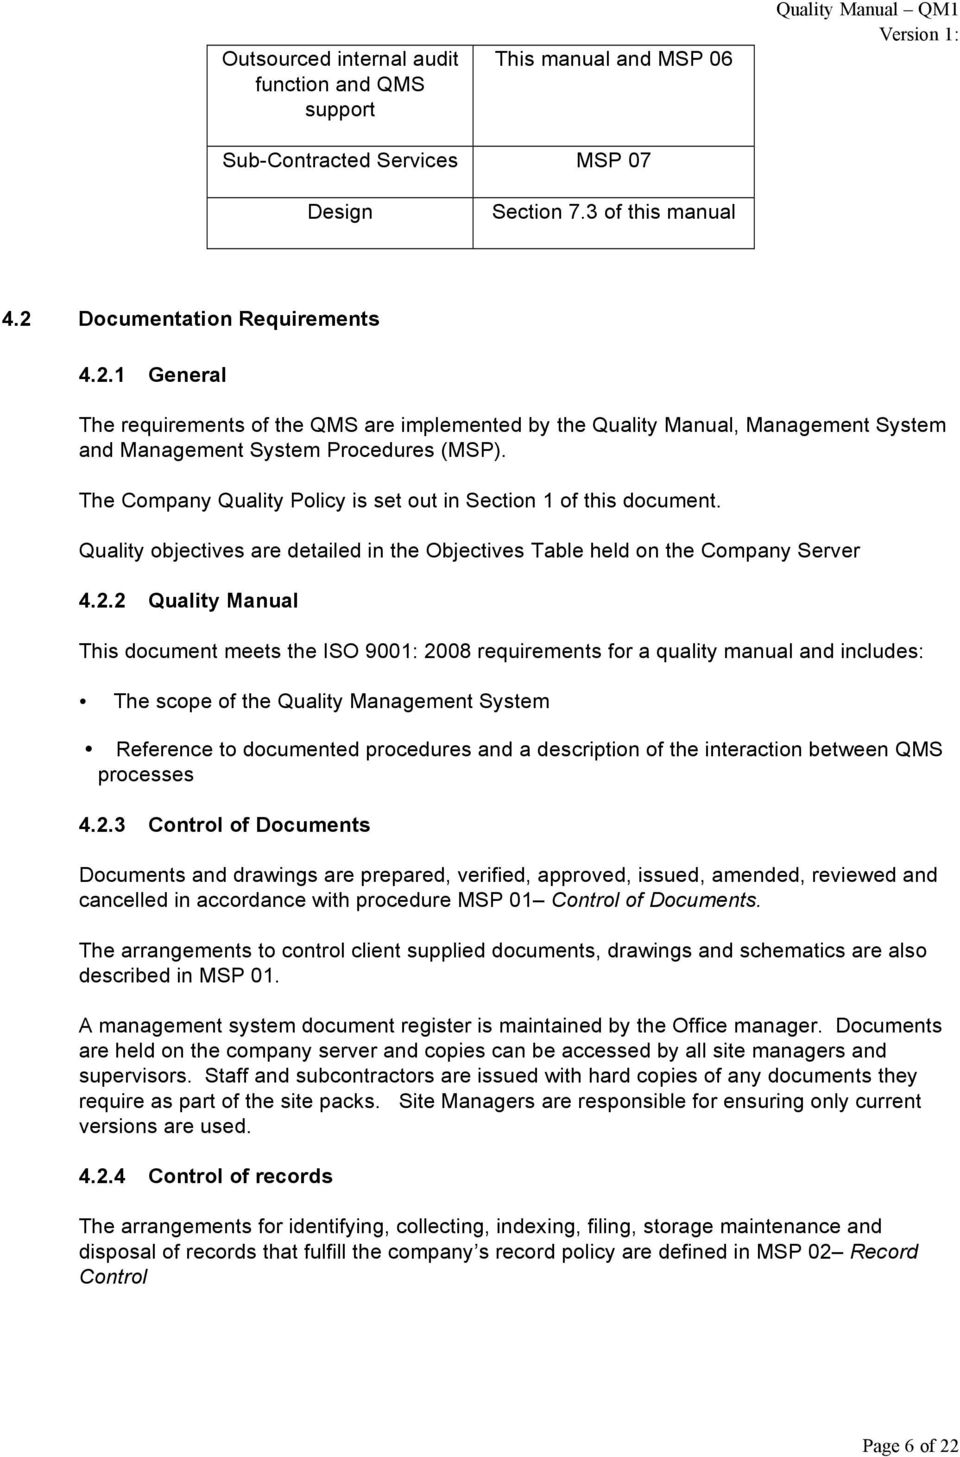 The Company Quality Policy is set out in Section 1 of this document. Quality objectives are detailed in the Objectives Table held on the Company Server 4.2.